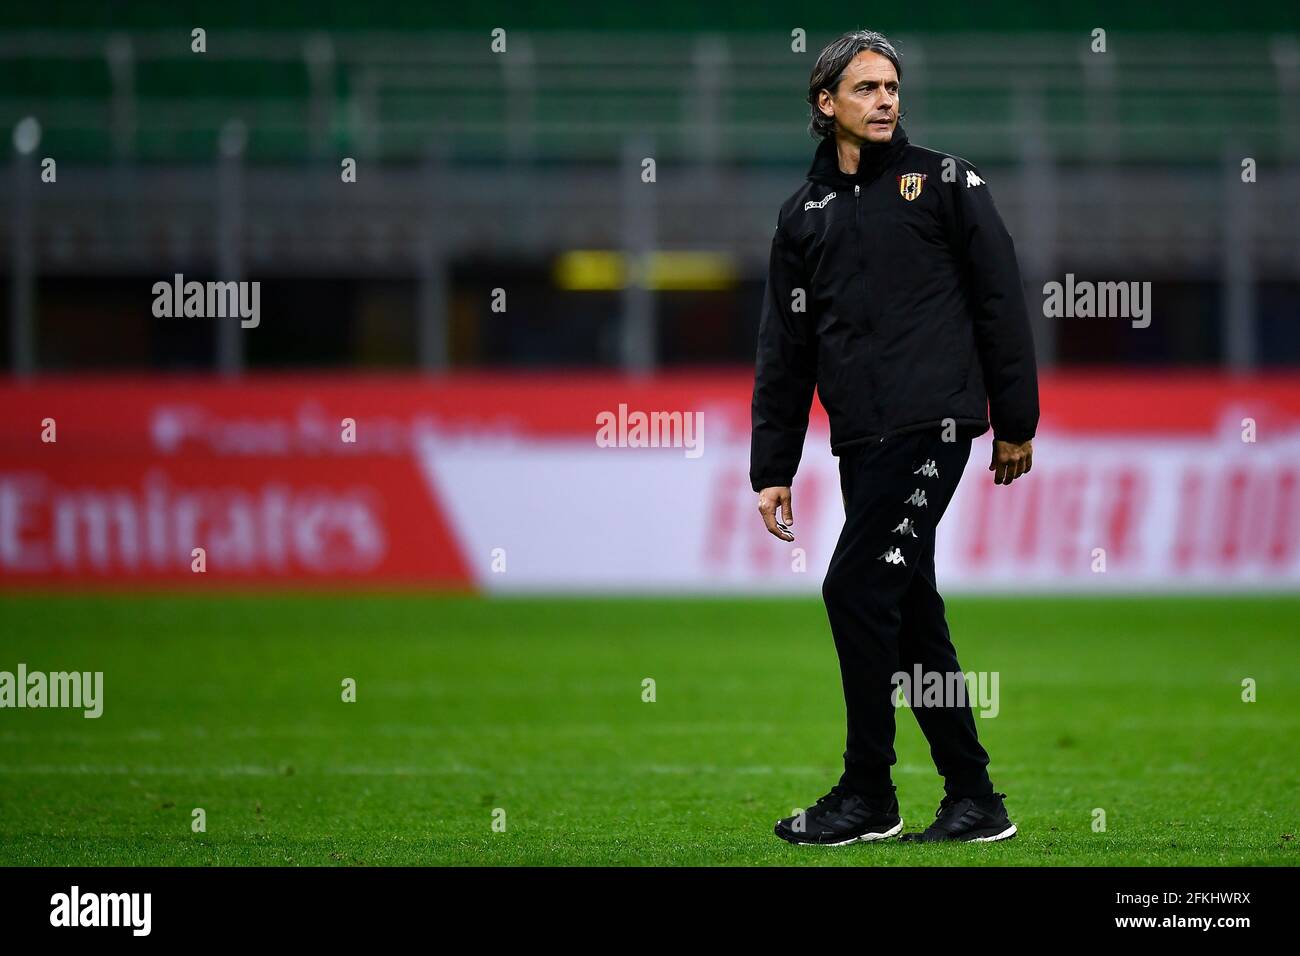 Milan, Italy. 01 May 2021. Filippo Inzaghi, head coach of Benevento Calcio, looks on at the end of the Serie A football match between AC Milan and Benevento Calcio. AC Milan won 2-0 over Benevento Calcio. Credit: Nicolò Campo/Alamy Live News Stock Photo